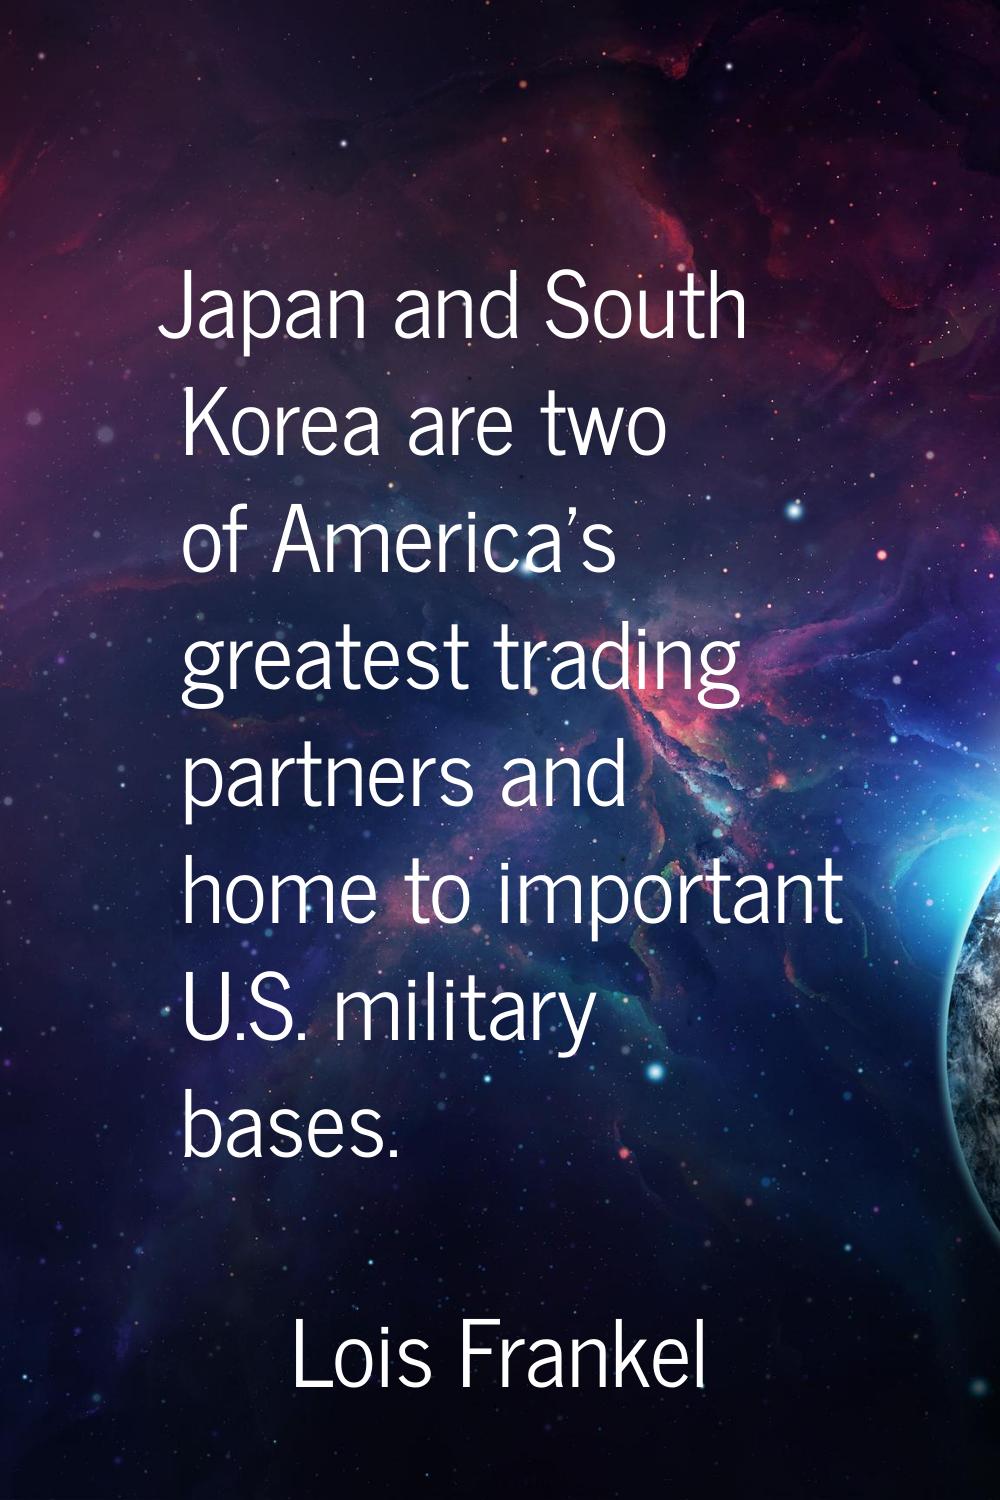 Japan and South Korea are two of America's greatest trading partners and home to important U.S. mil